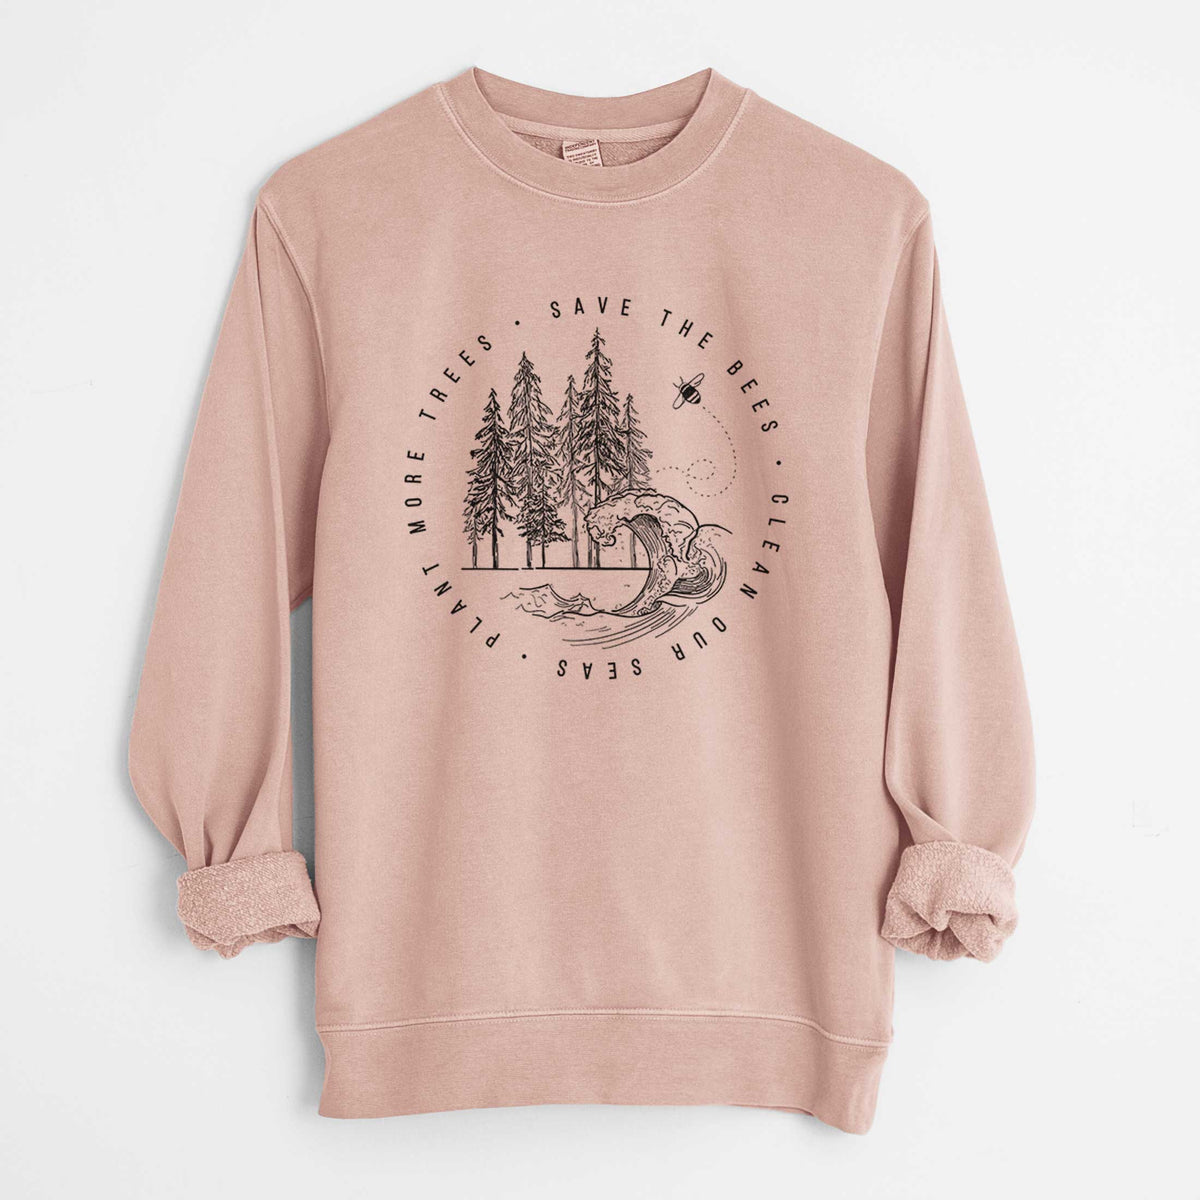 Save the Bees, Clean our Seas, Plant more Trees - Unisex Pigment Dyed Crew Sweatshirt